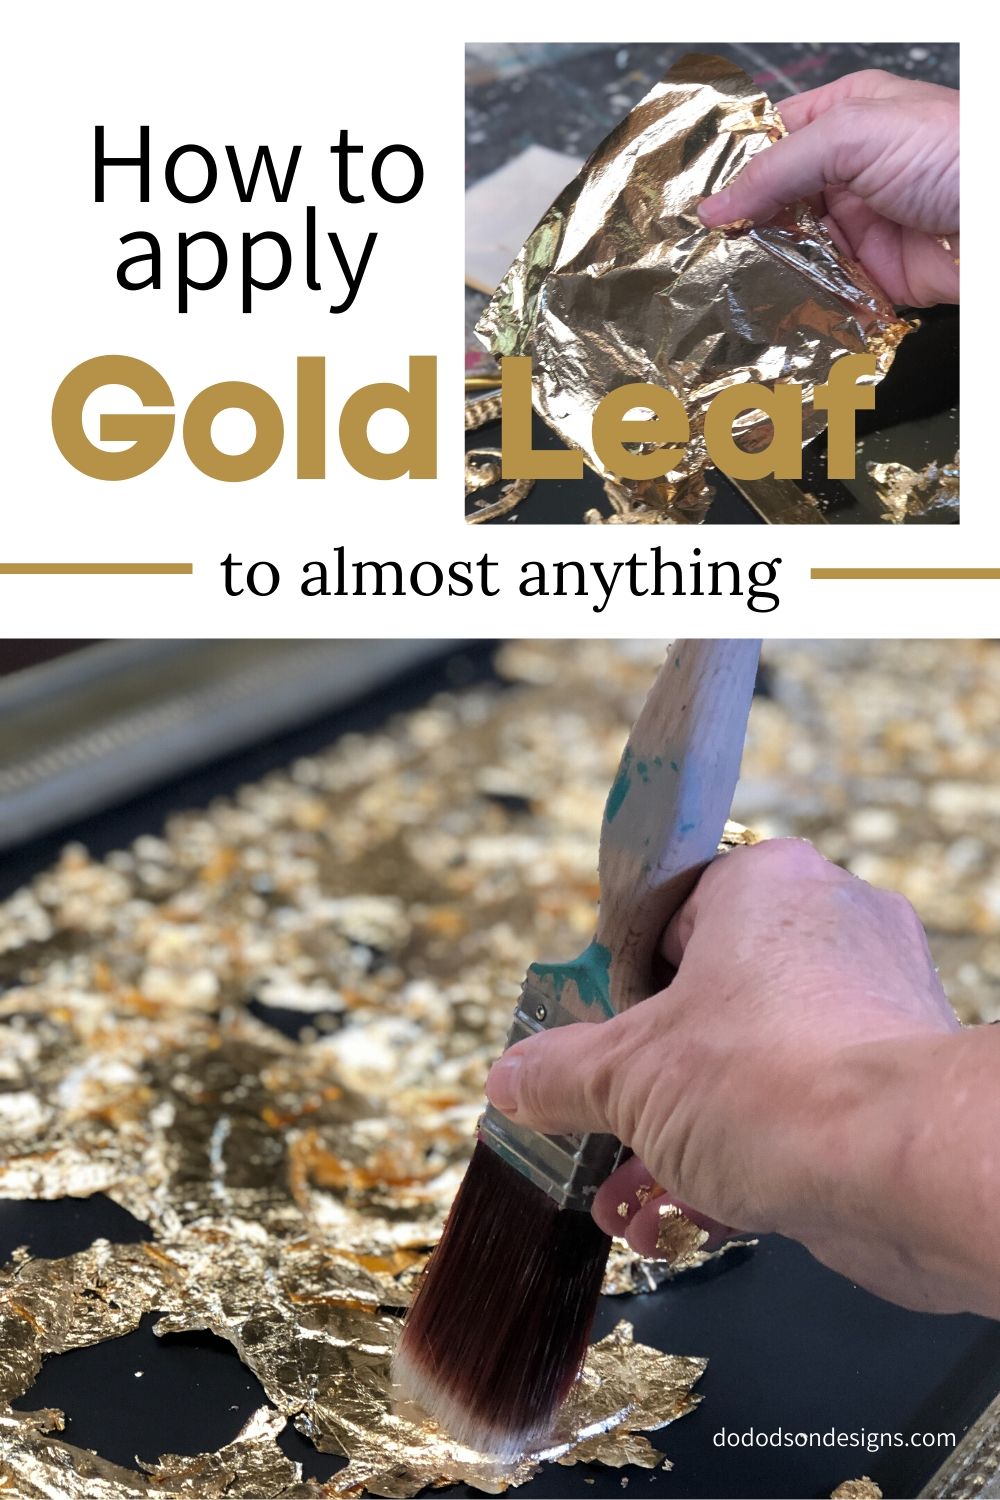 How To Apply Gold Leaf To Almost... Anything!